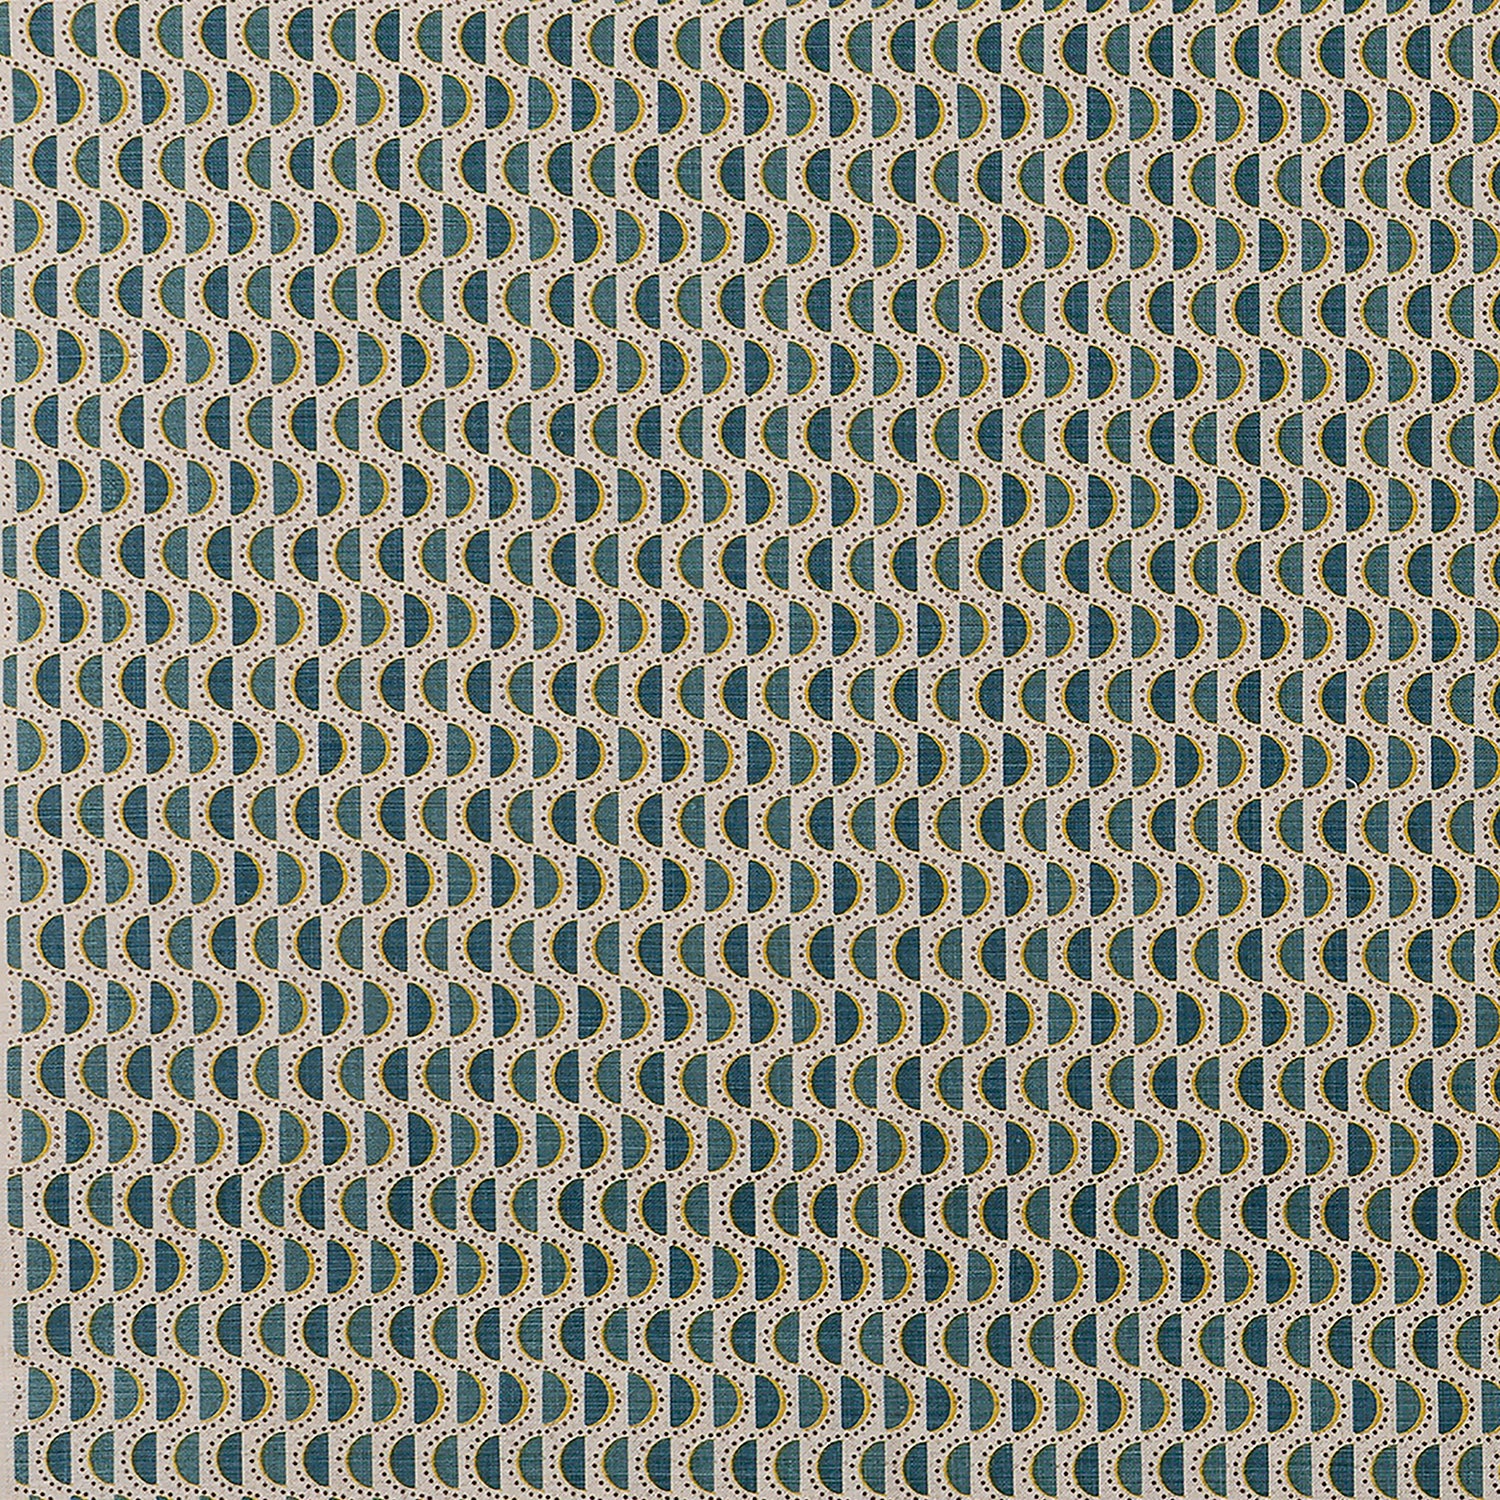 Fabric in a linear geometric print in shades of green, navy and yellow on a tan field.